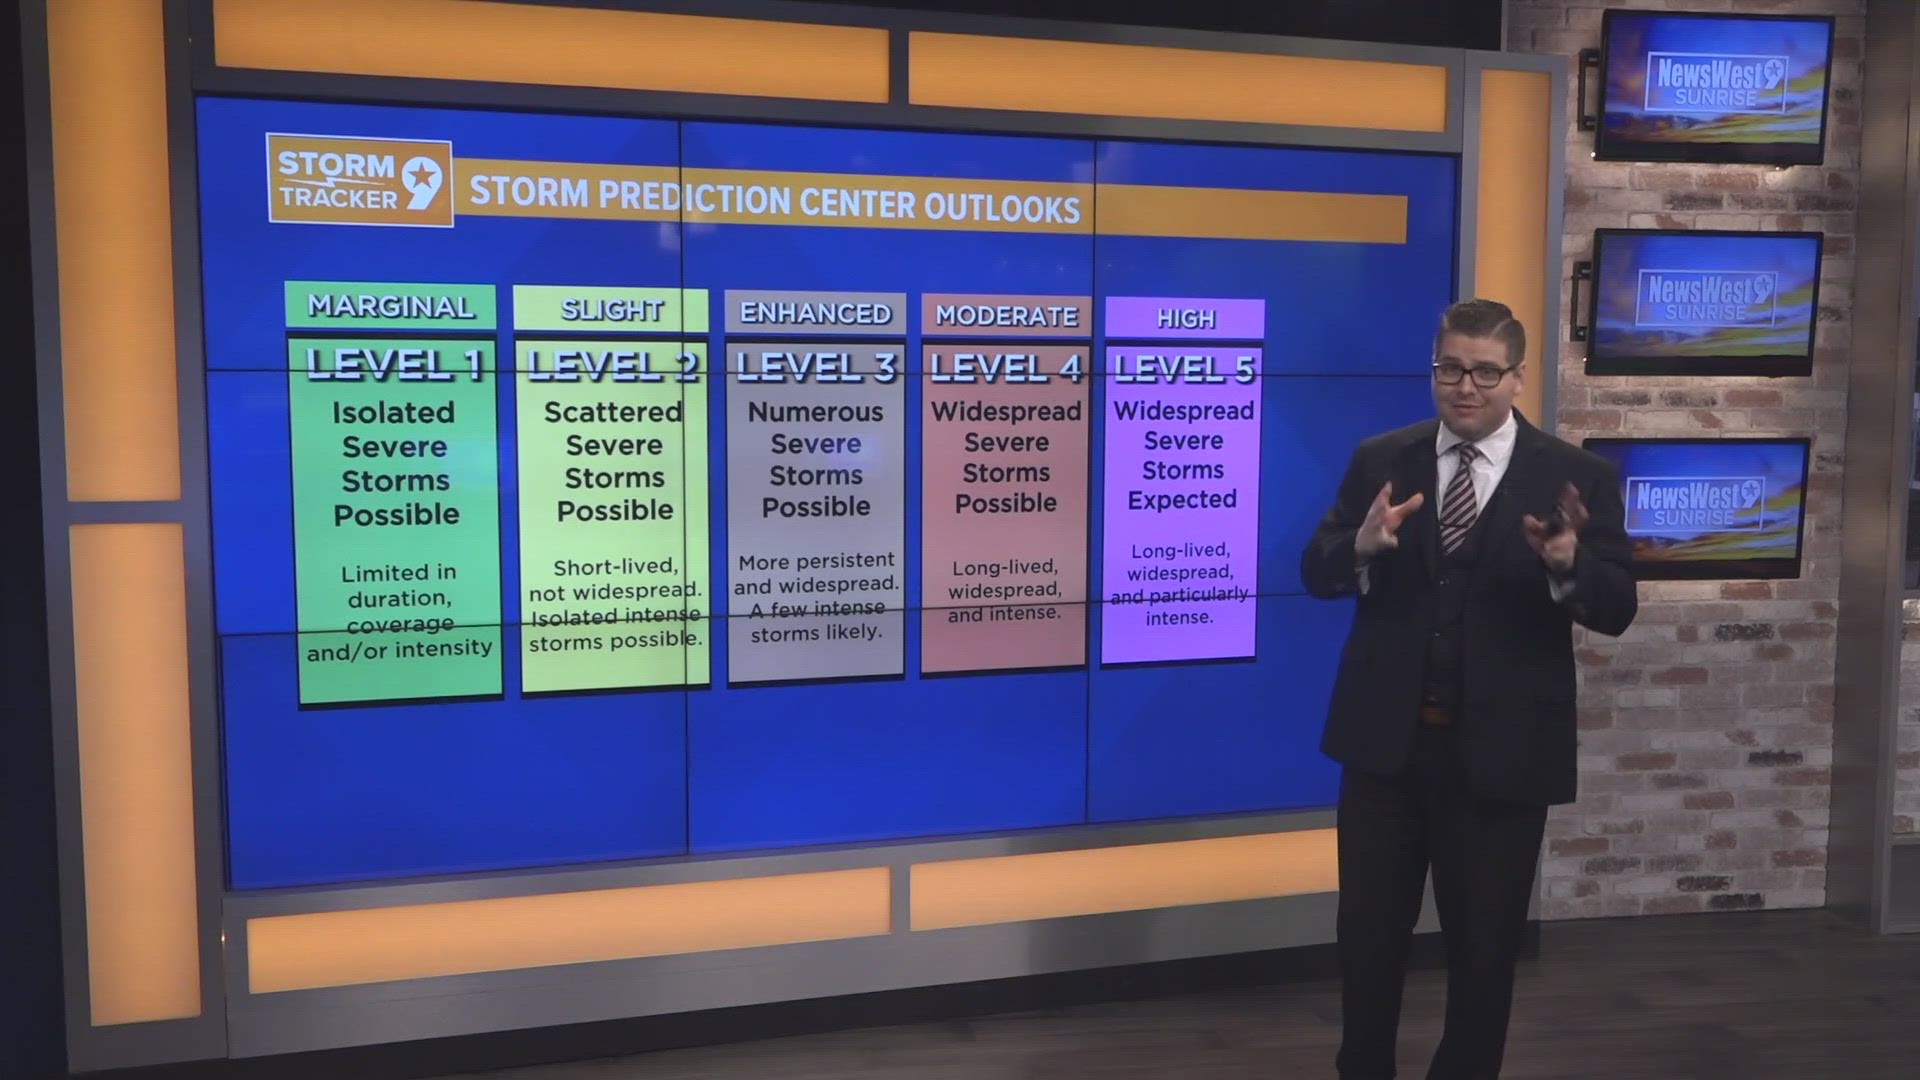 Chief Meteorologist Jordan Frazier wraps up severe weather preparedness week with a look at severe weather risk factors and ratings.